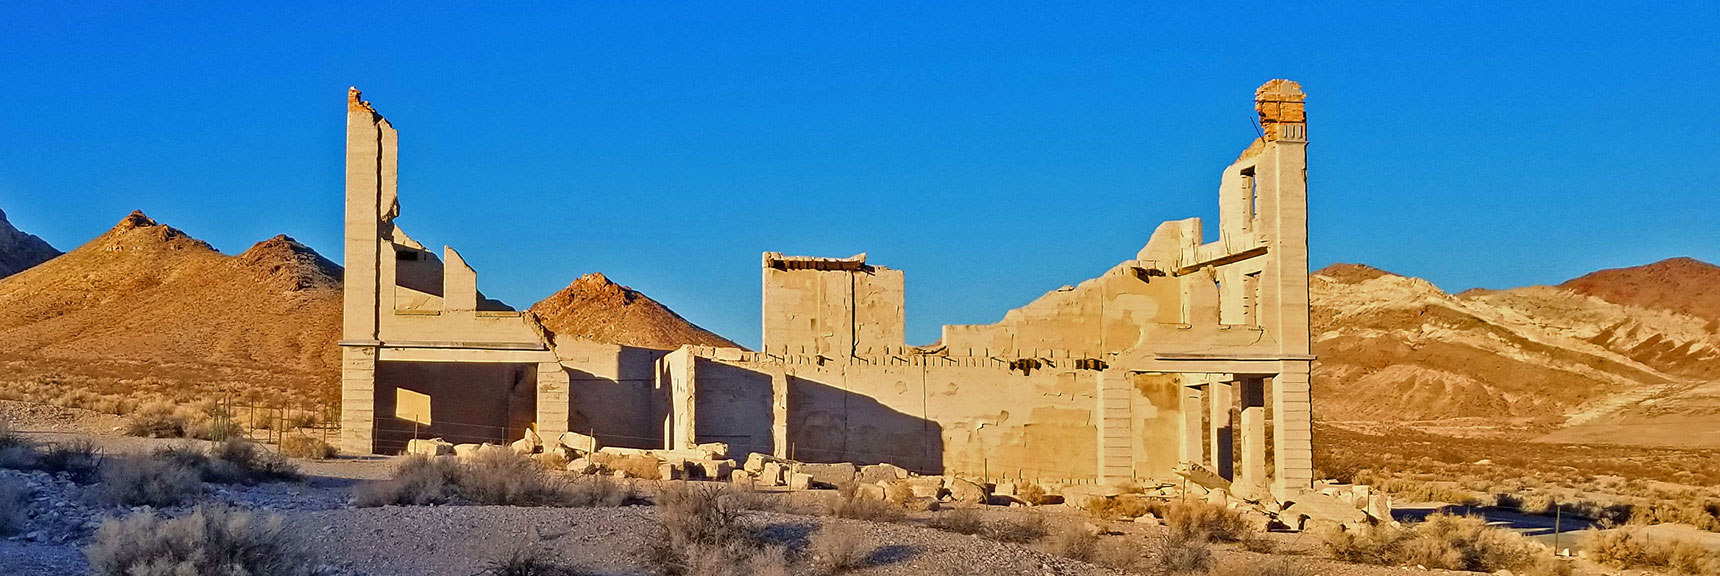 Cook Bank Building, Largest, Most Elaborate Building in Rhyolite | Rhyolite Ghost Town | Death Valley Area, Nevada